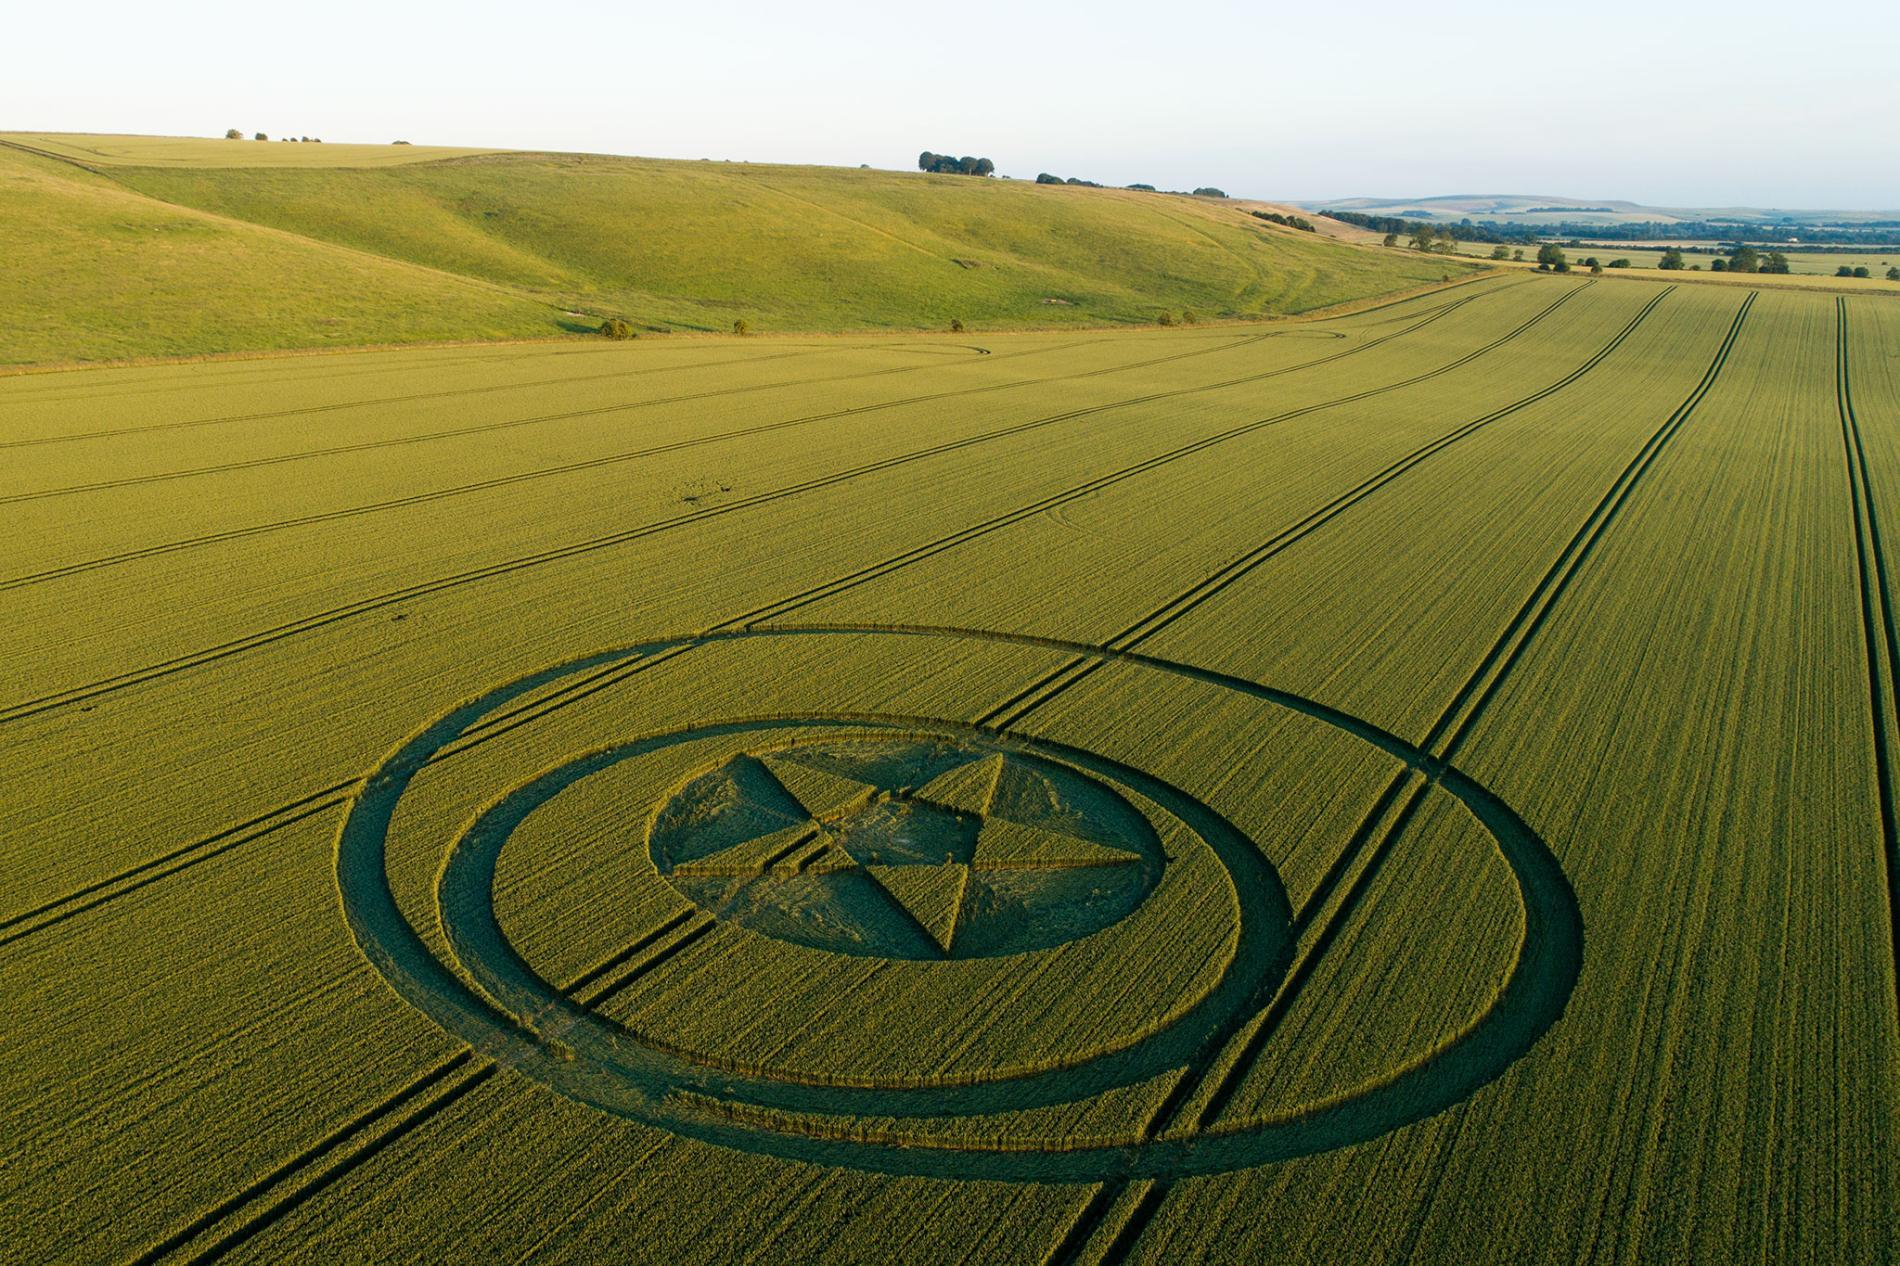 A crop circle near Hackpen Hill, Wiltshire, slices through a farm with surg...